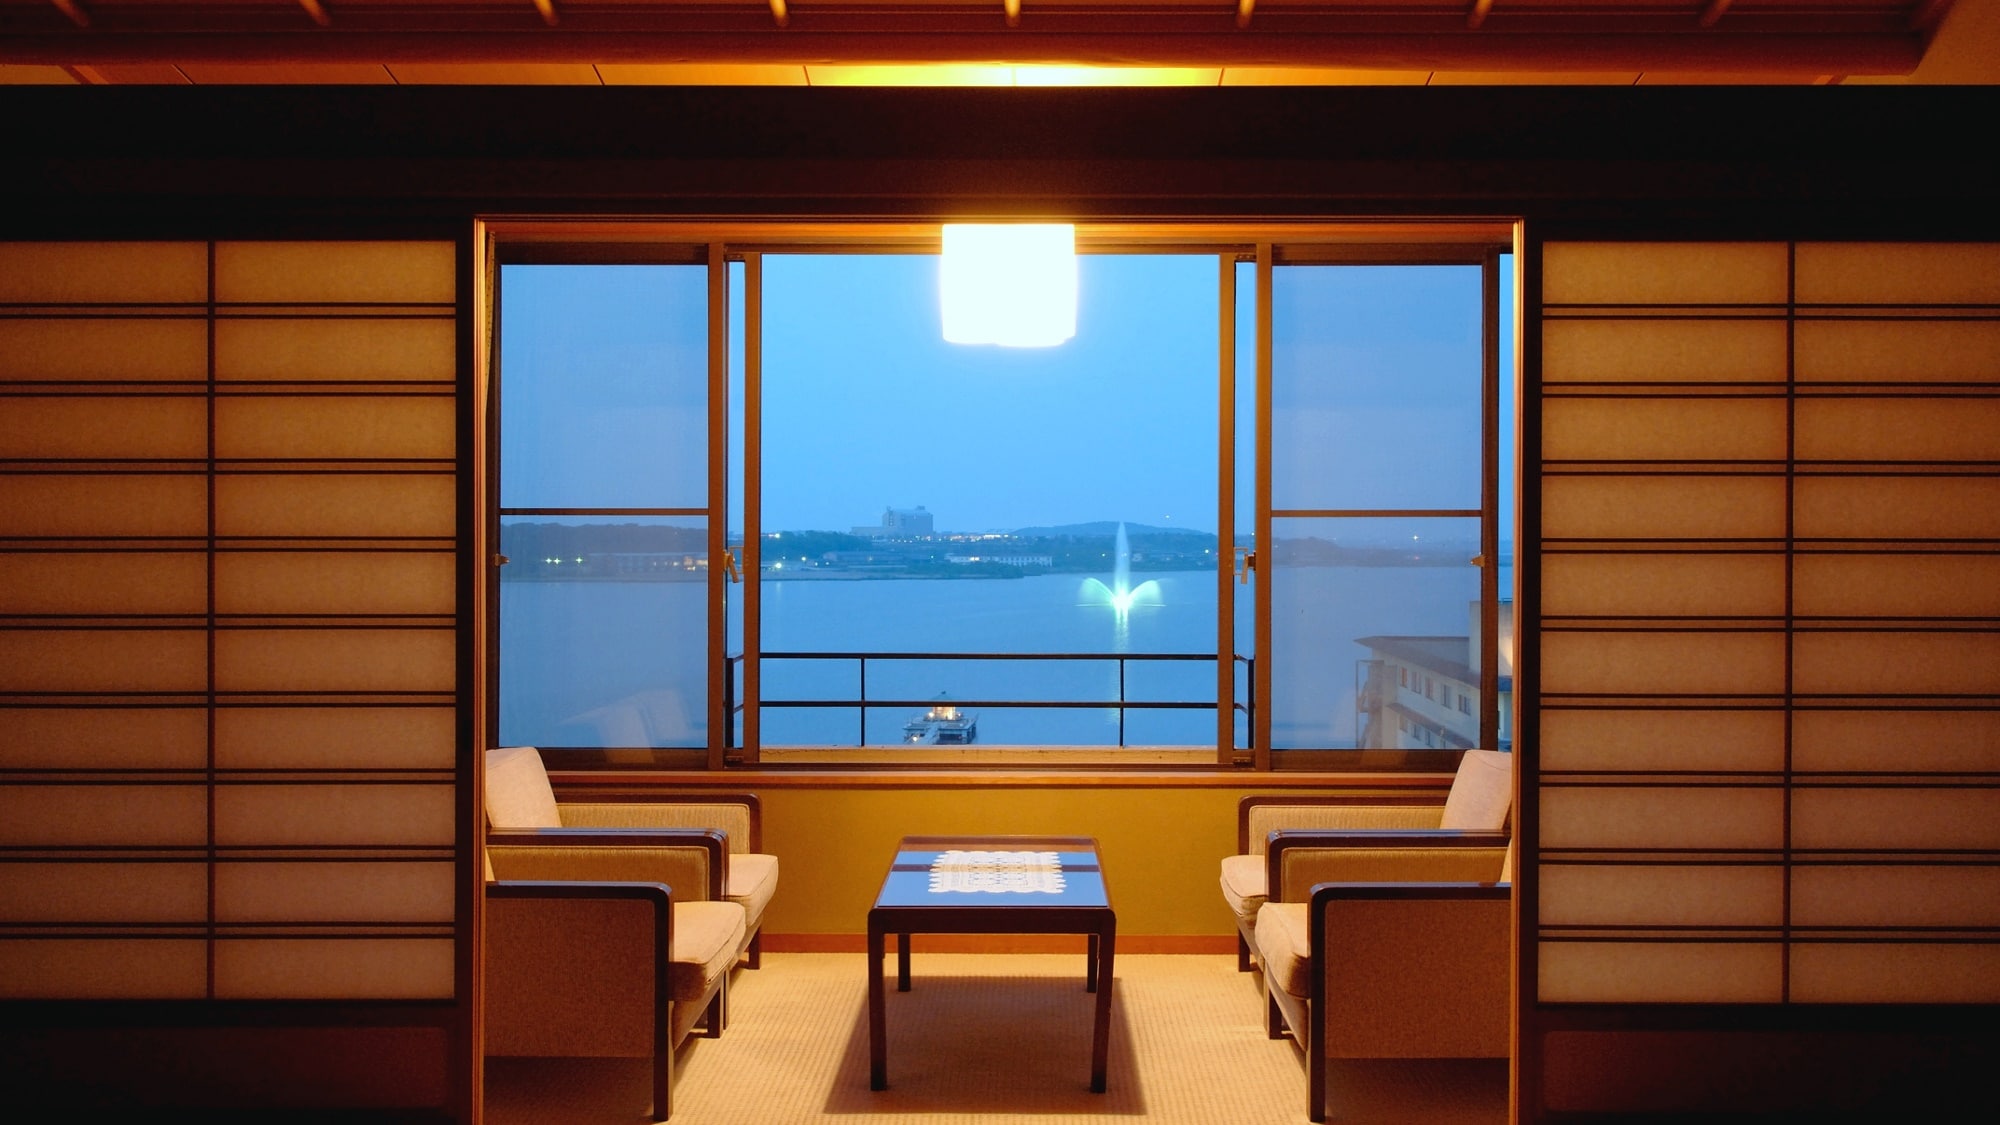 An example of a Japanese-style room view